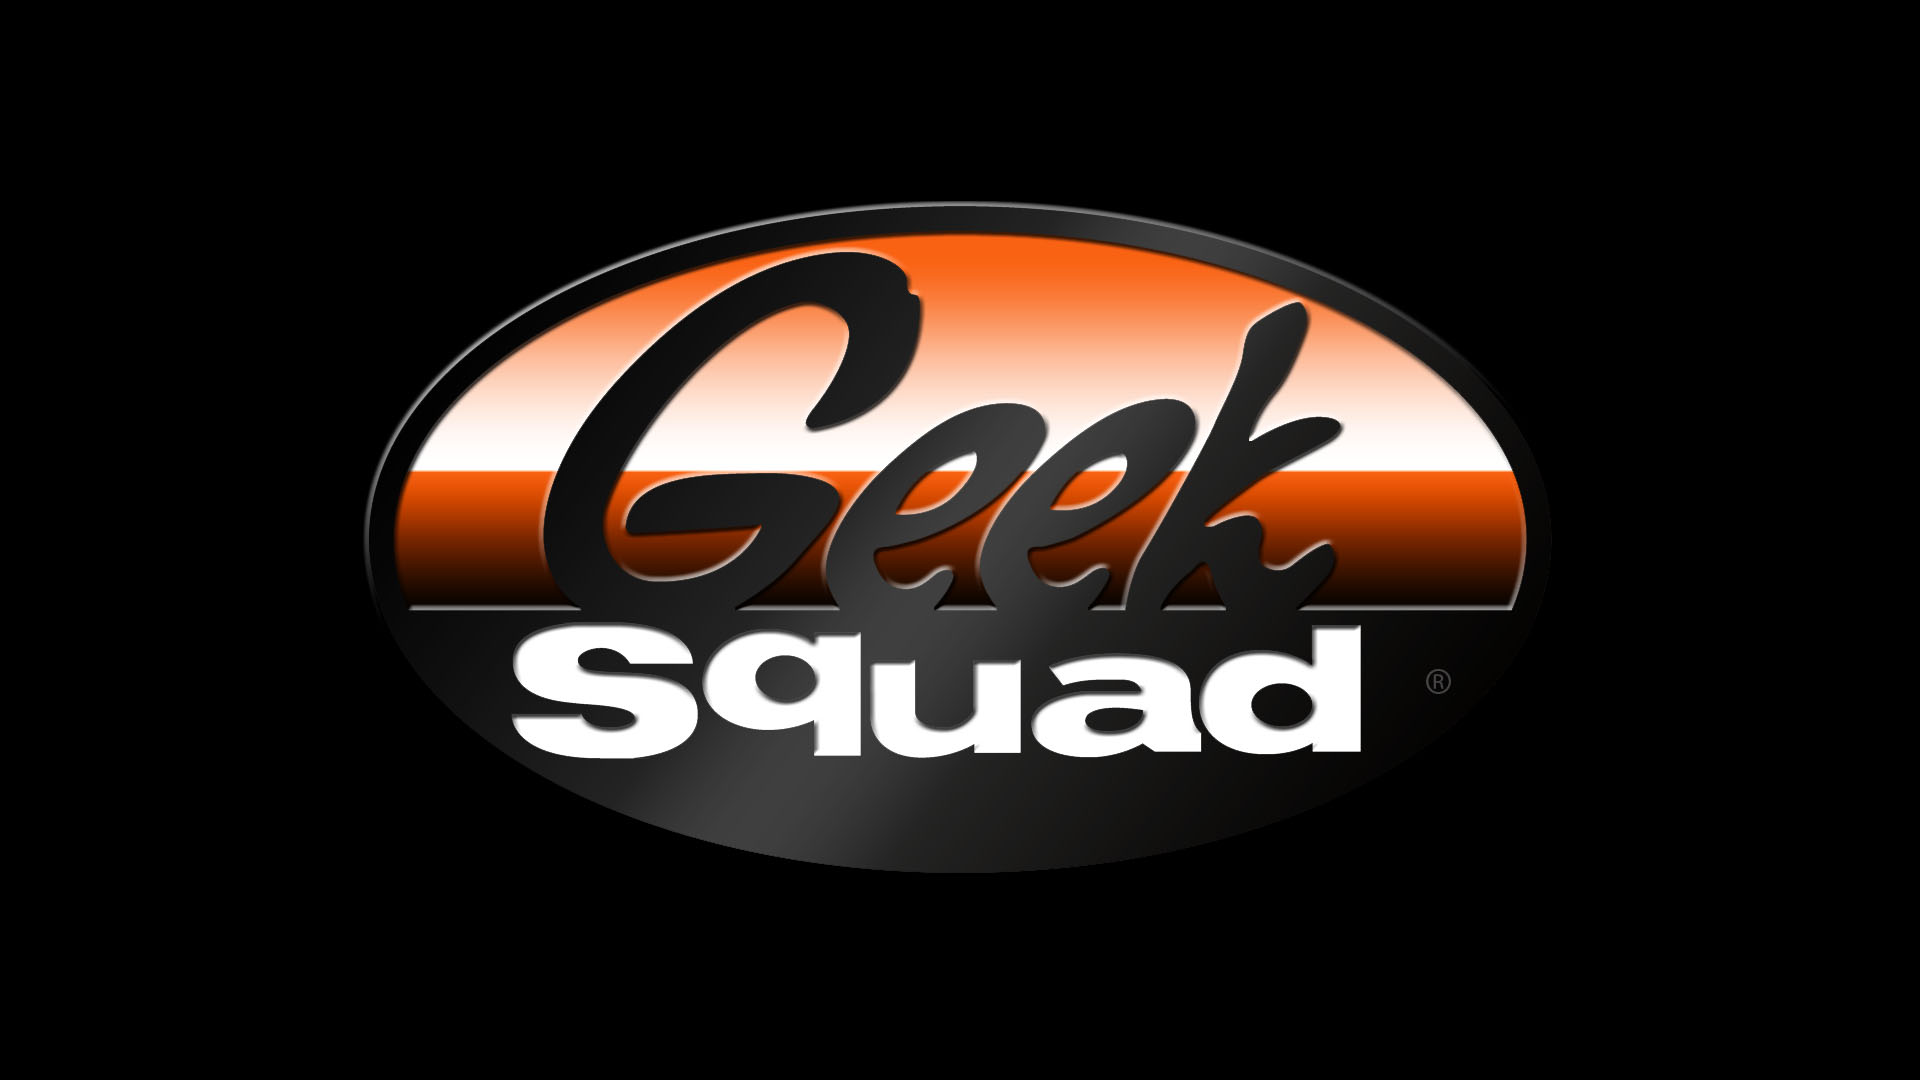 Report: Best Buy's "Geek Squad" Was a Front for FBI Domestic